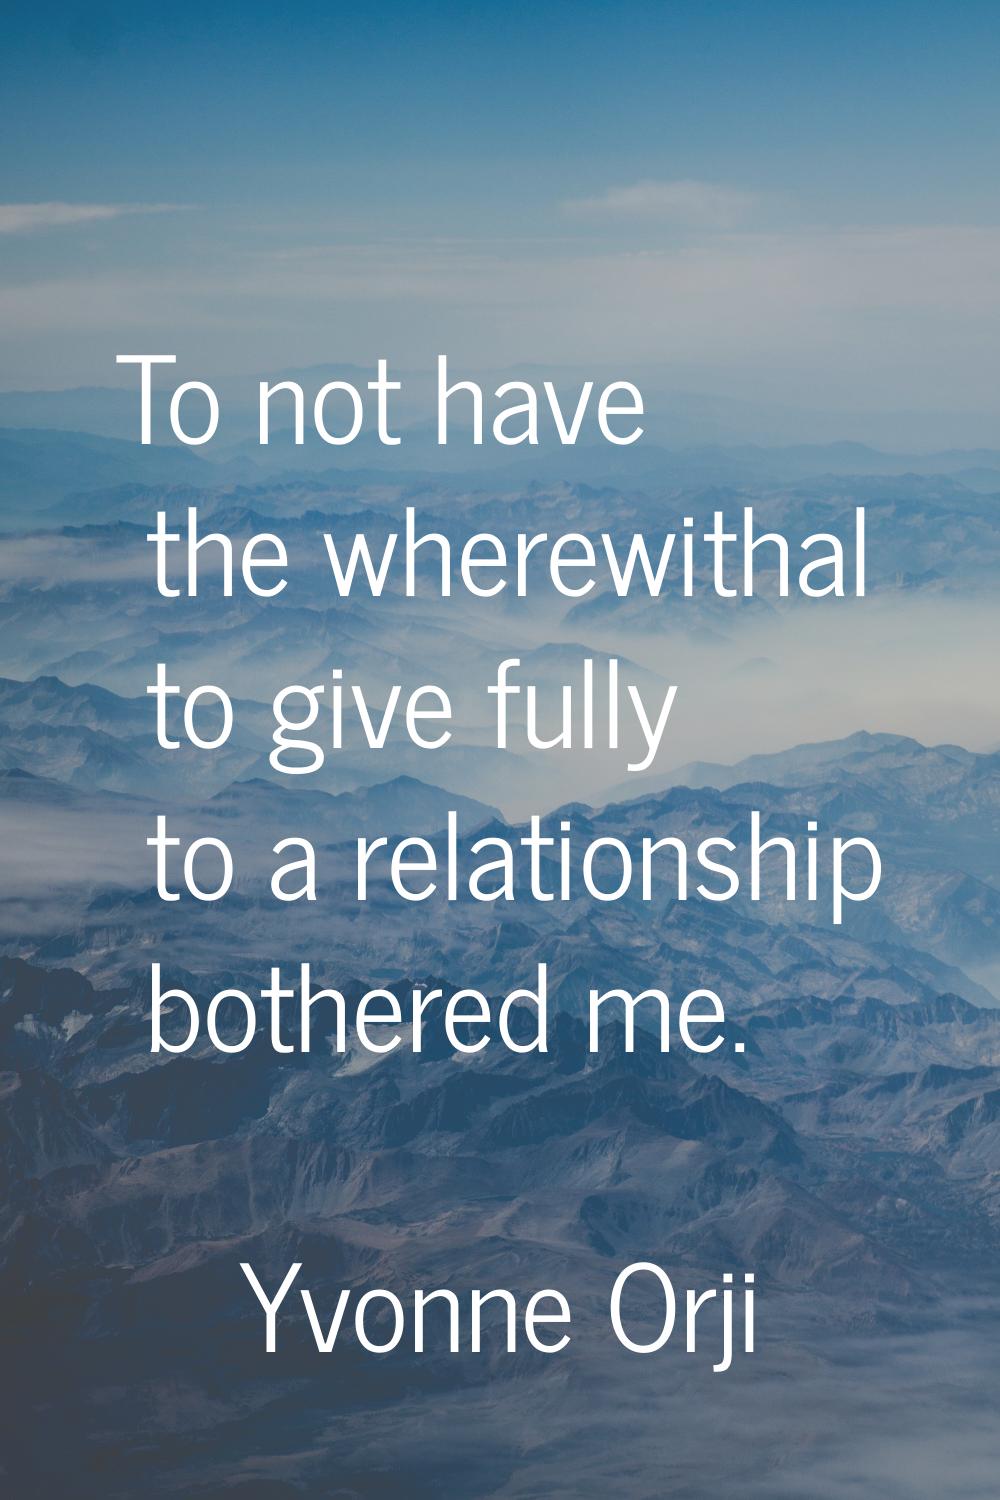 To not have the wherewithal to give fully to a relationship bothered me.